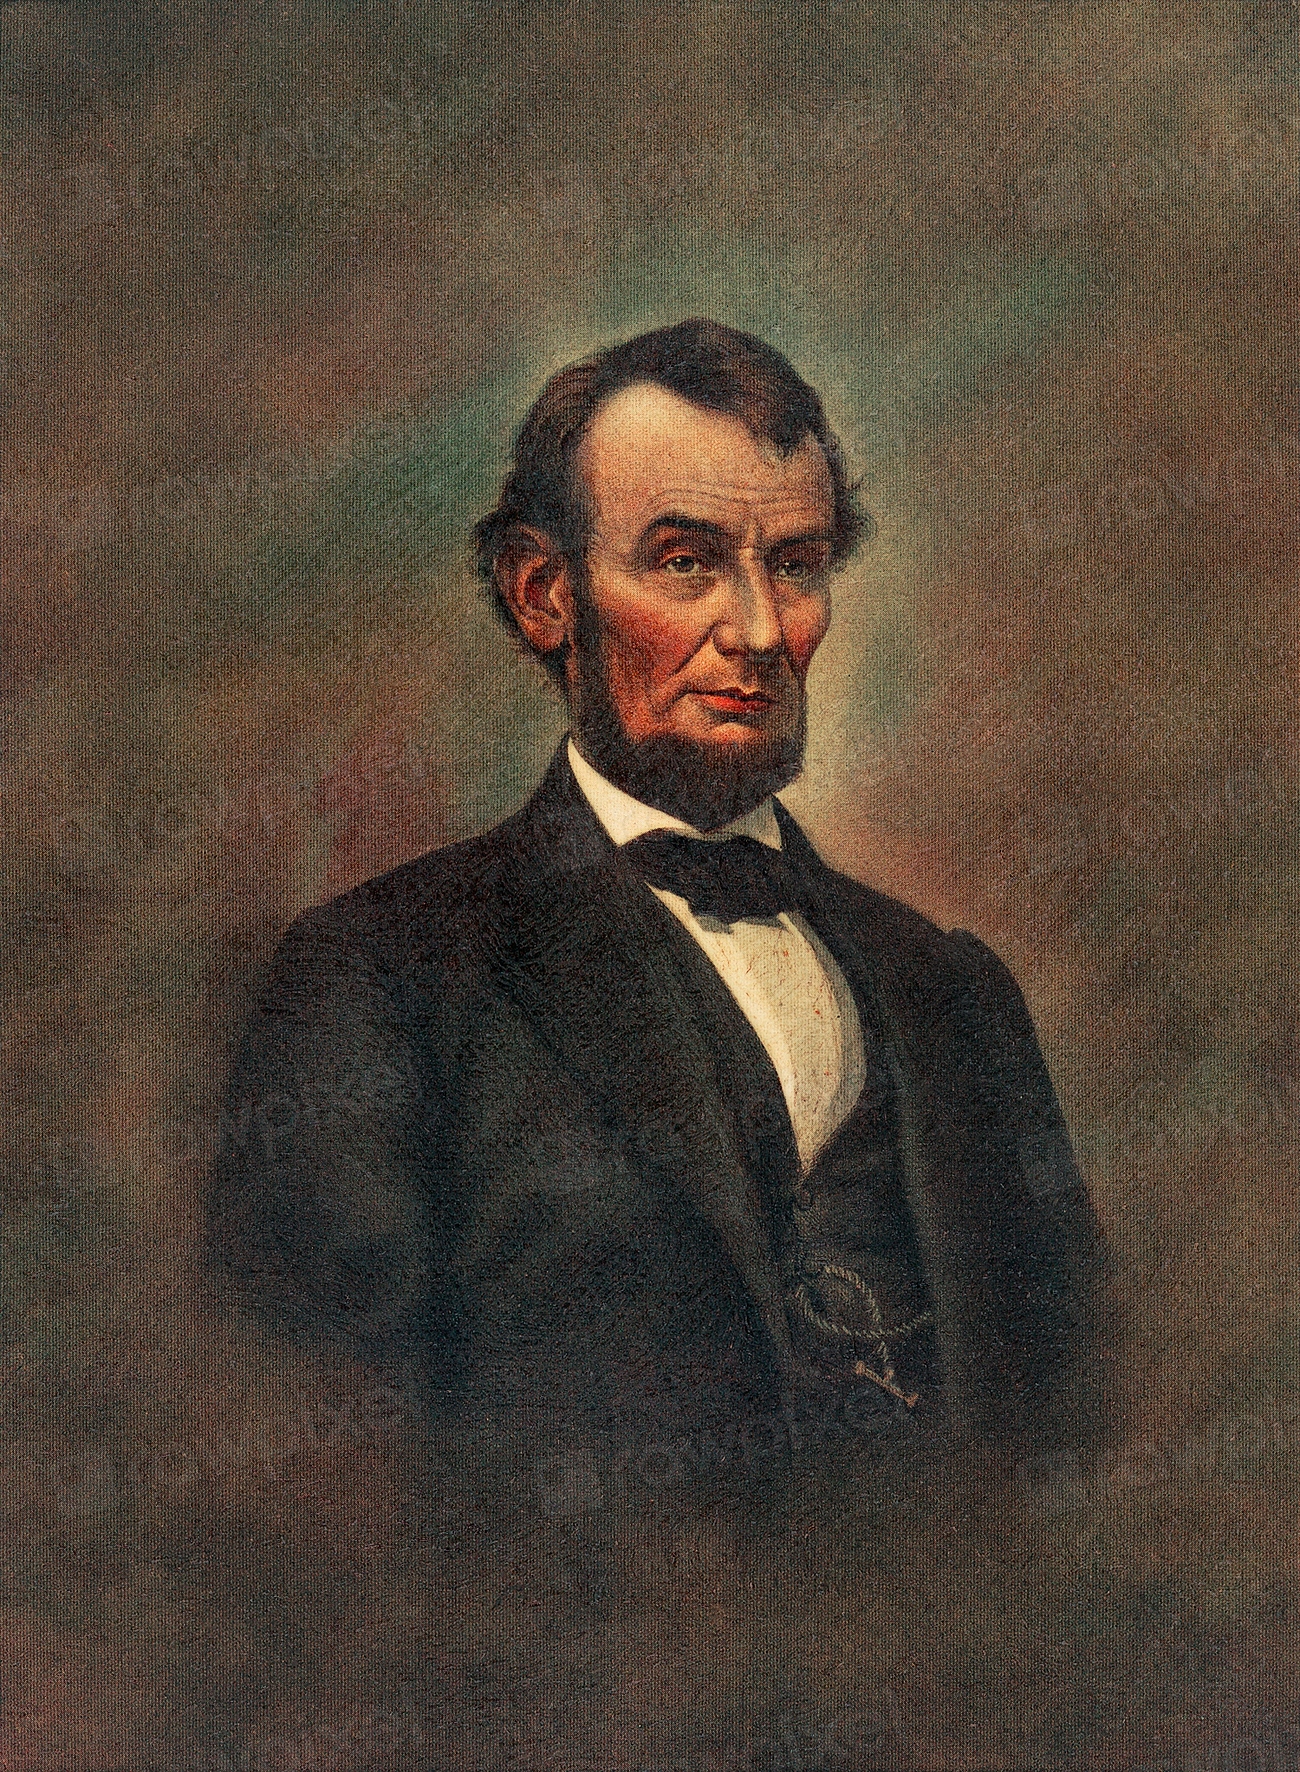 Oil Painting Abraham Lincoln (1809-1865) | Free Photo Illustration ...